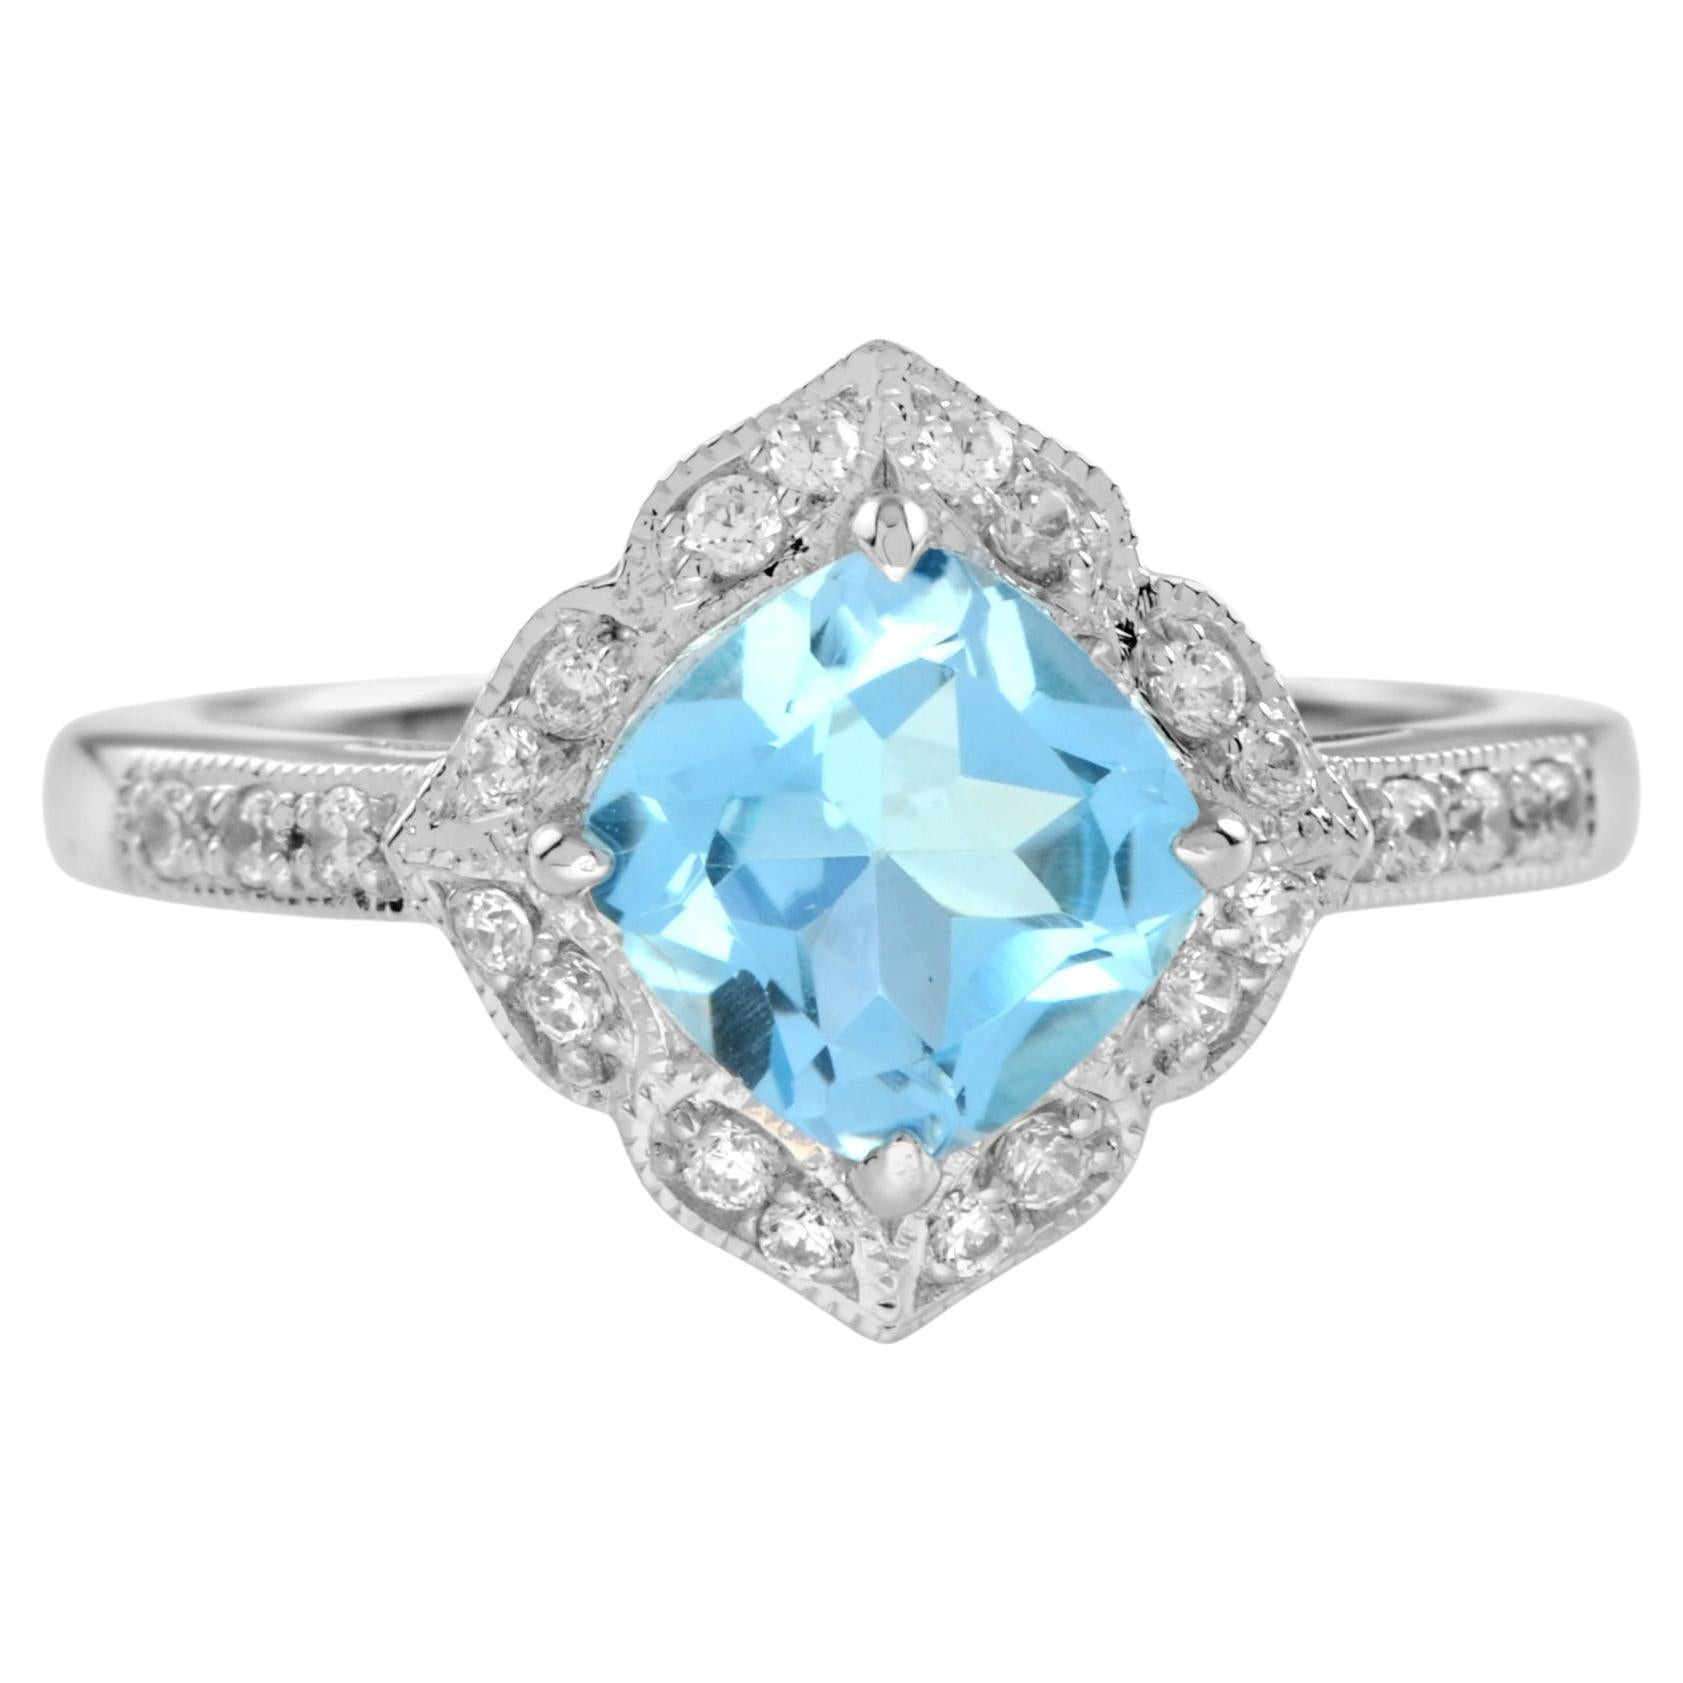 For Sale:  Cushion Blue Topaz and Diamond Vintage Style Engagement Ring in 14K White Gold